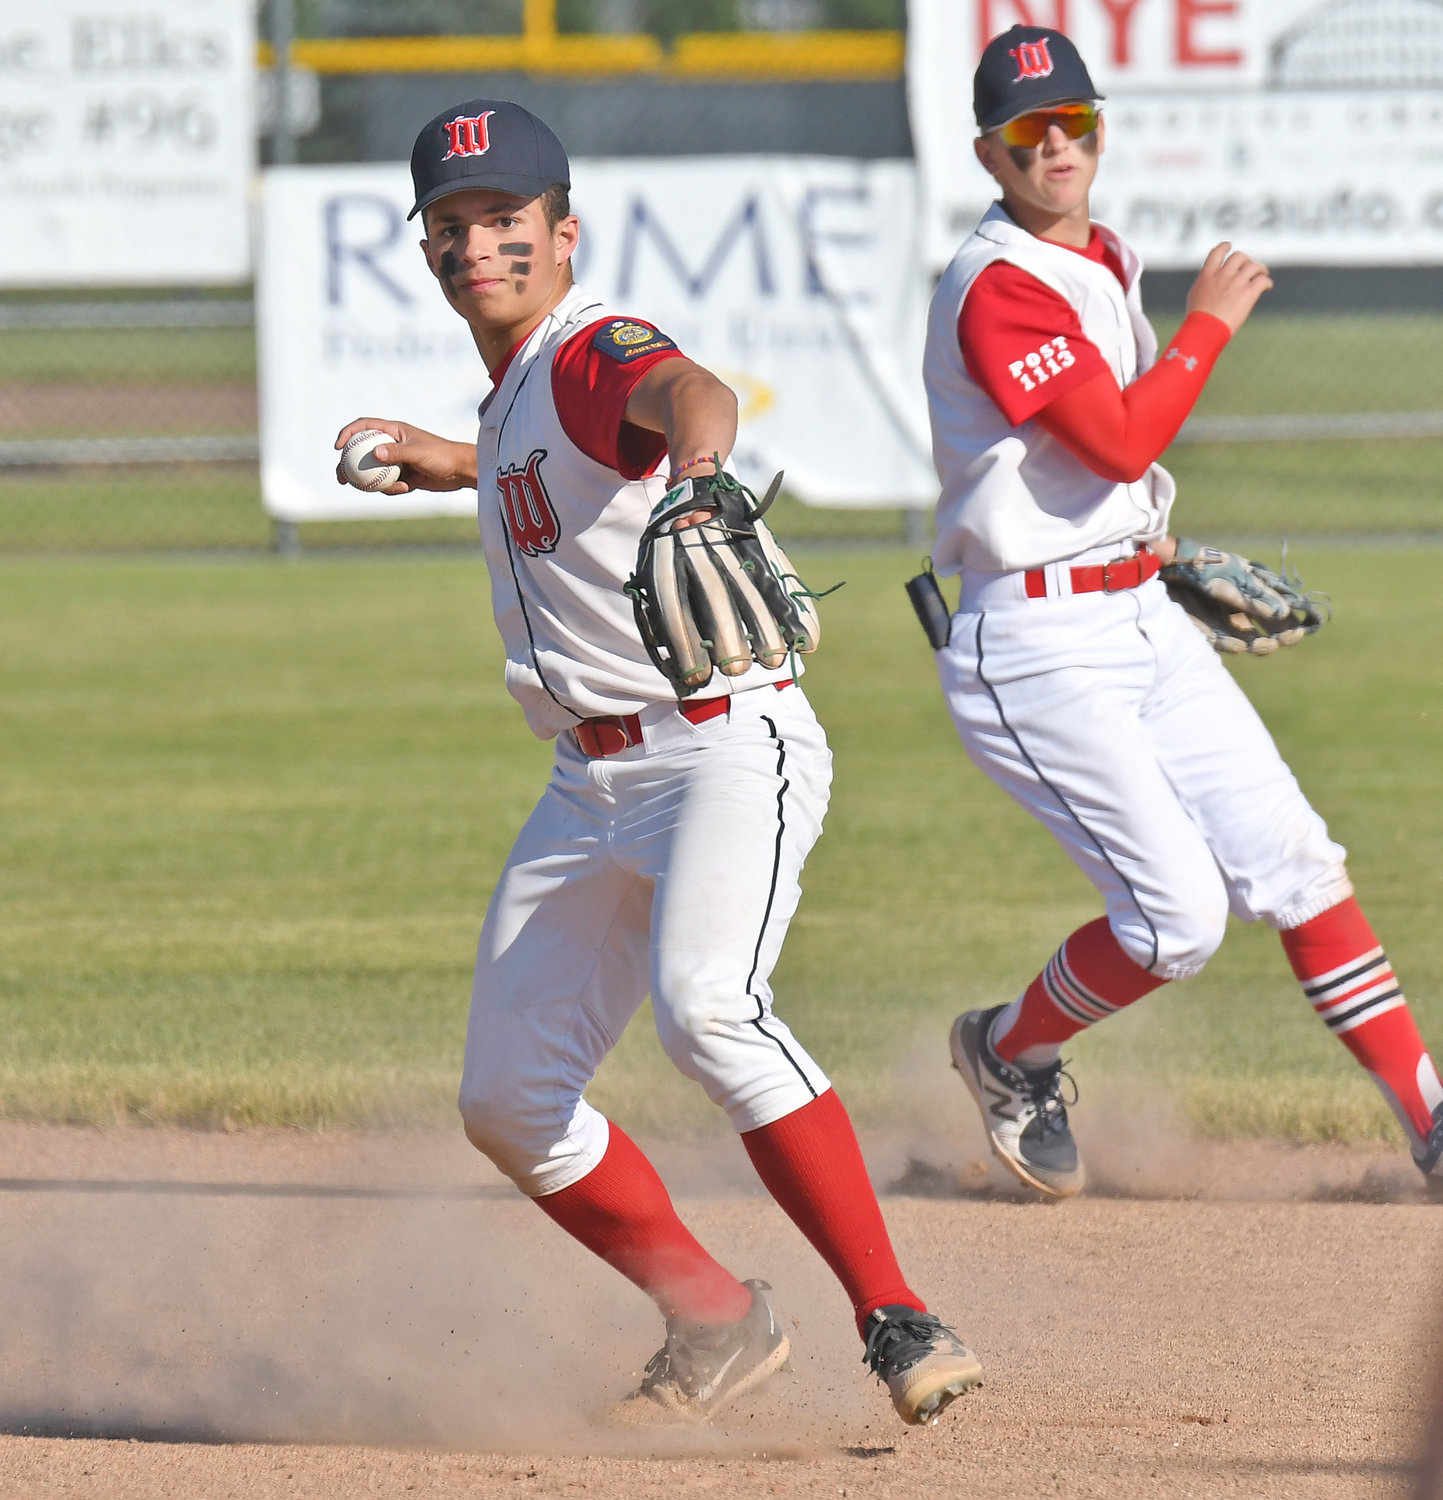 Whitestown Post second baseman Anthony Sawanec makes a throw to first base for an out with shortstop Kody Czternastek backing him up during Monday’s American Legion game against New Hartford Post at DeLutis Field in Rome. Game details were unavailable as of press time.